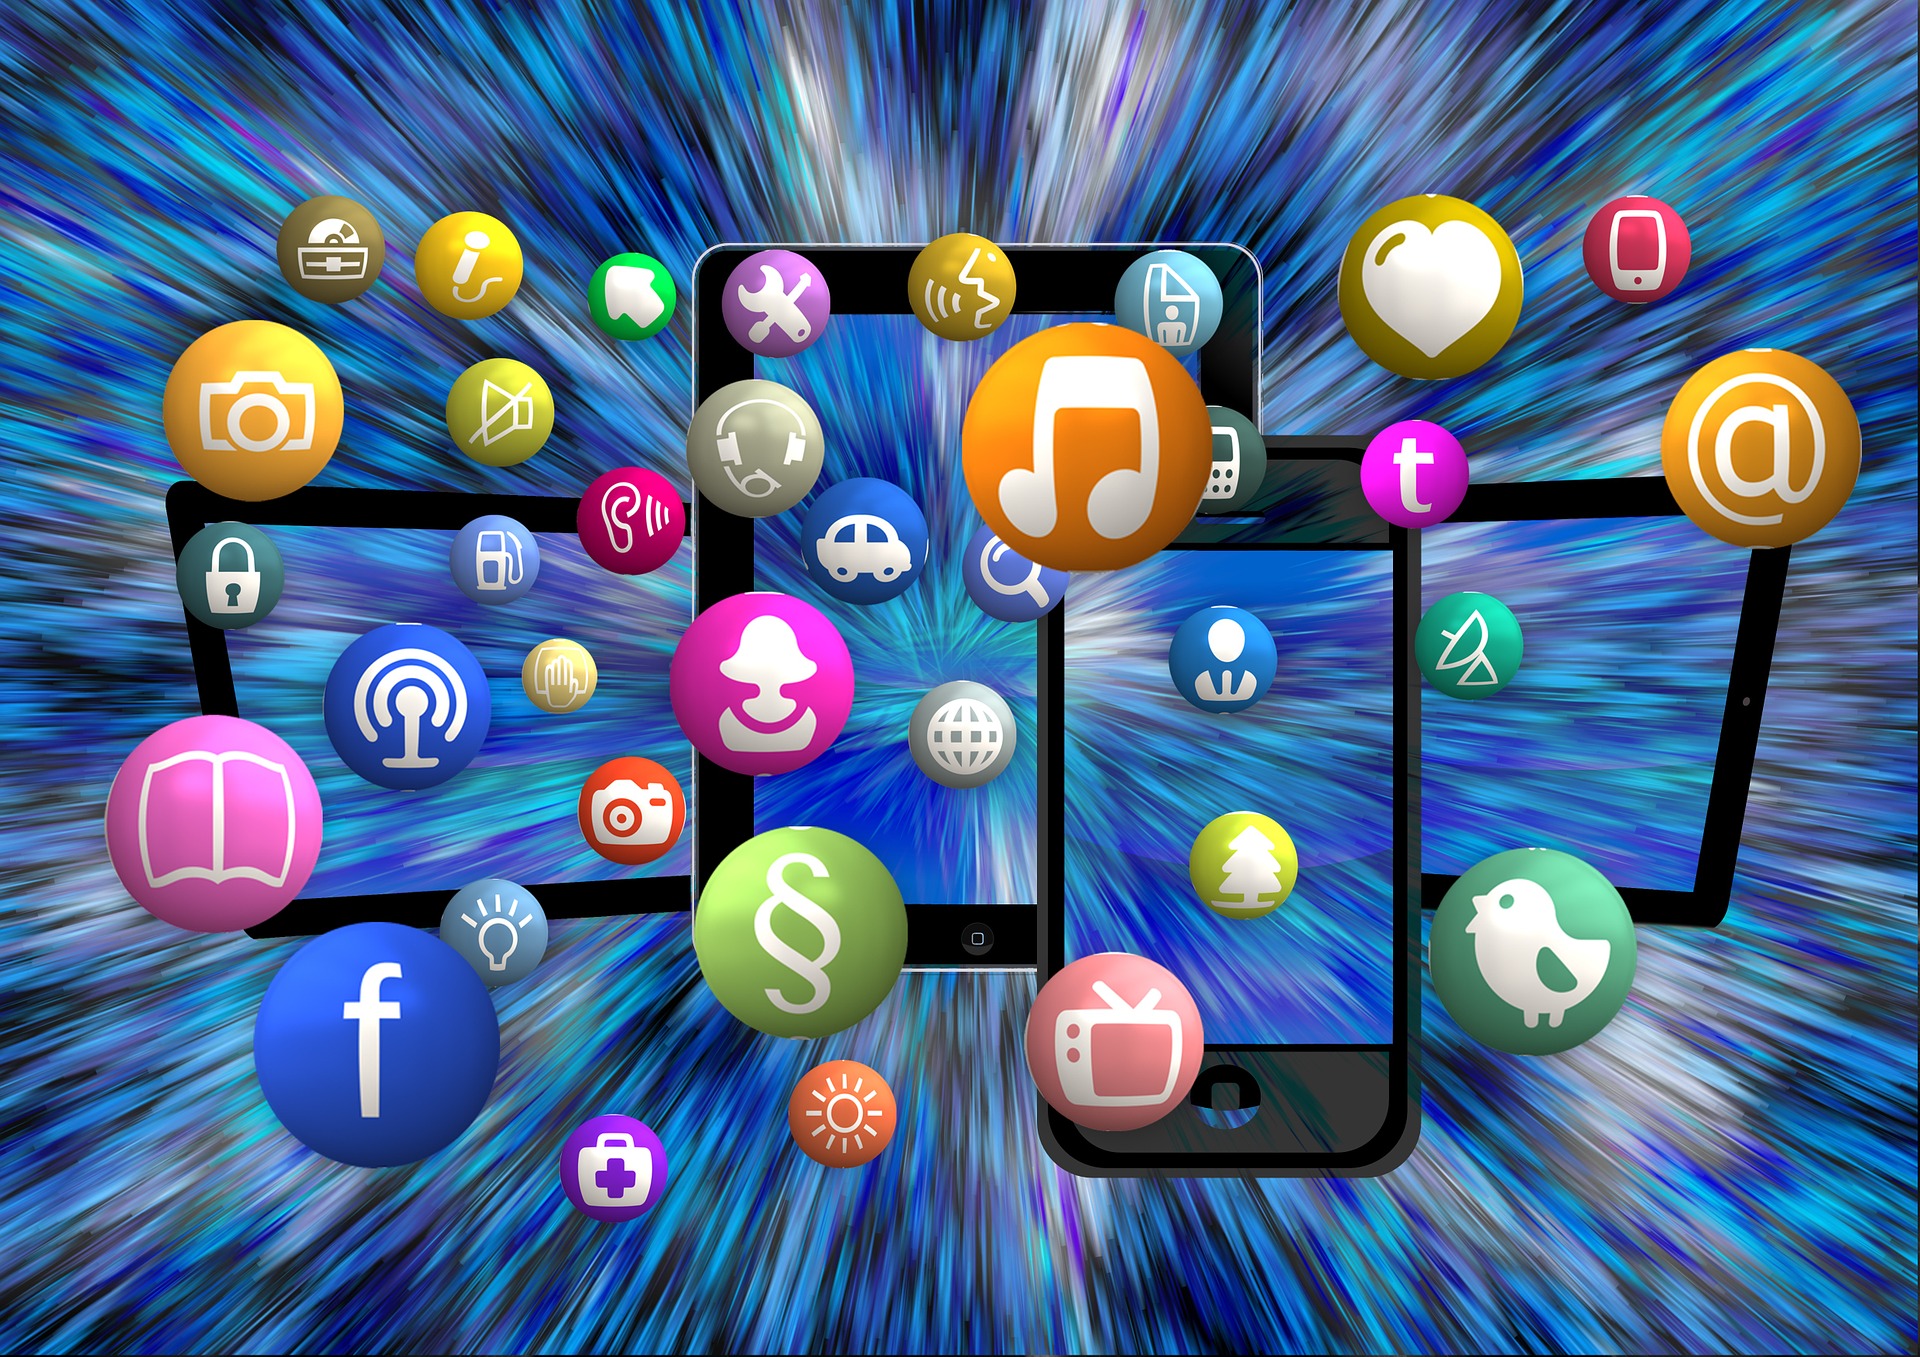 Market of mobile apps and its trends and forecast